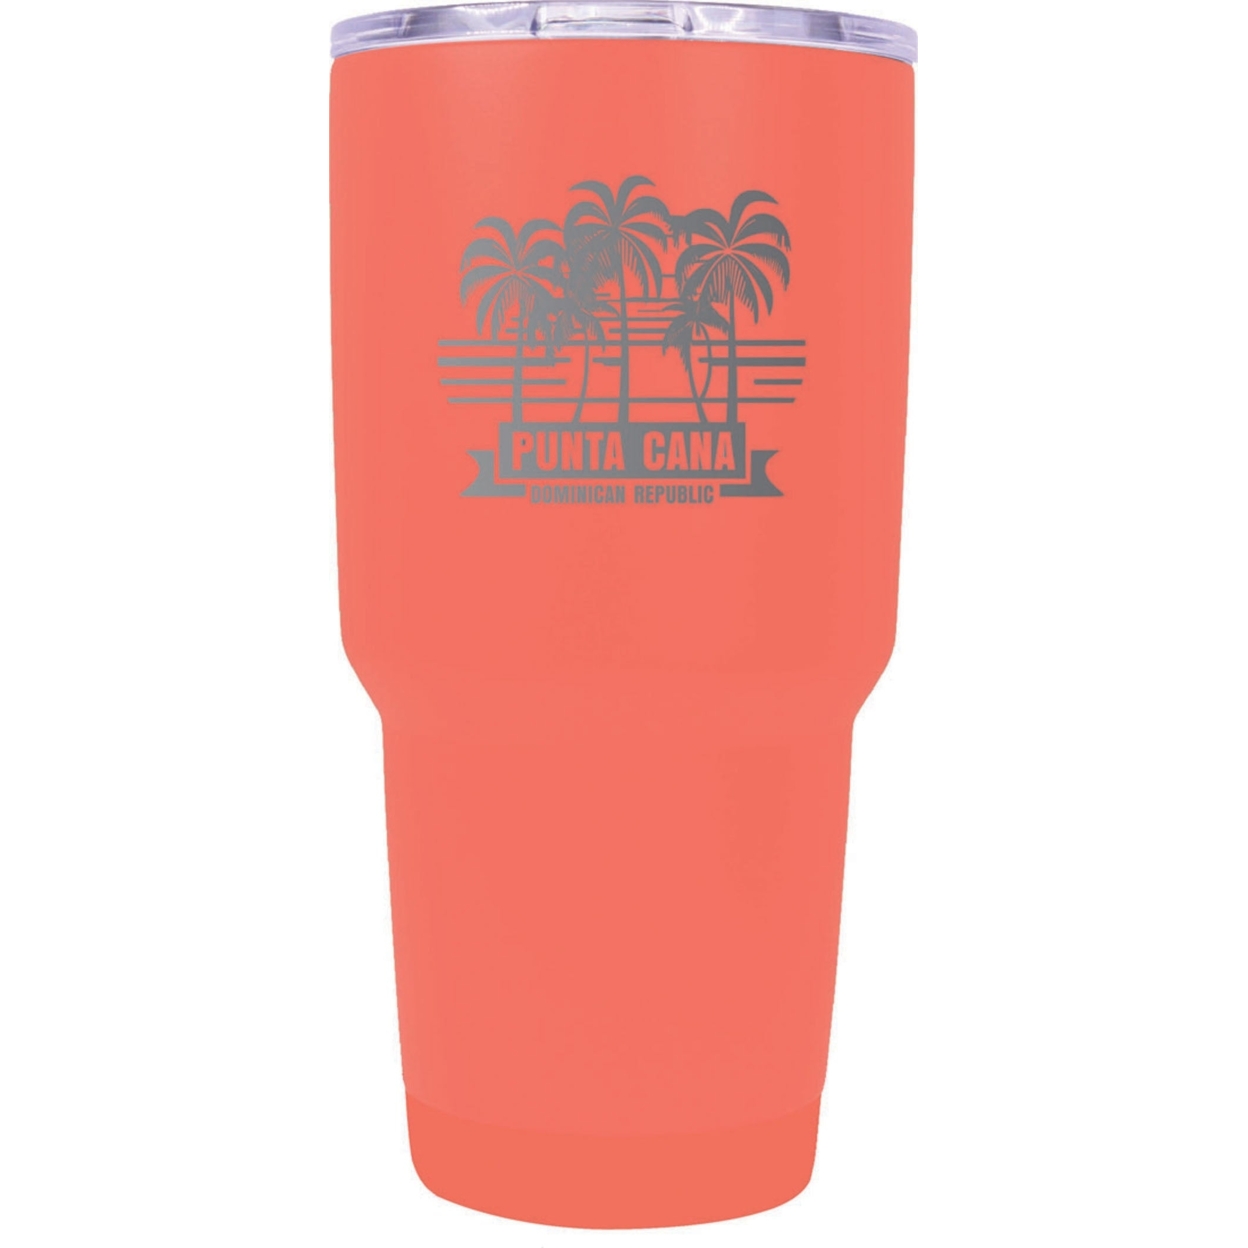 Punta Cana Dominican Republic Souvenir 24 Oz Insulated Stainless Steel Tumbler Etched - Coral, PALM BEACH